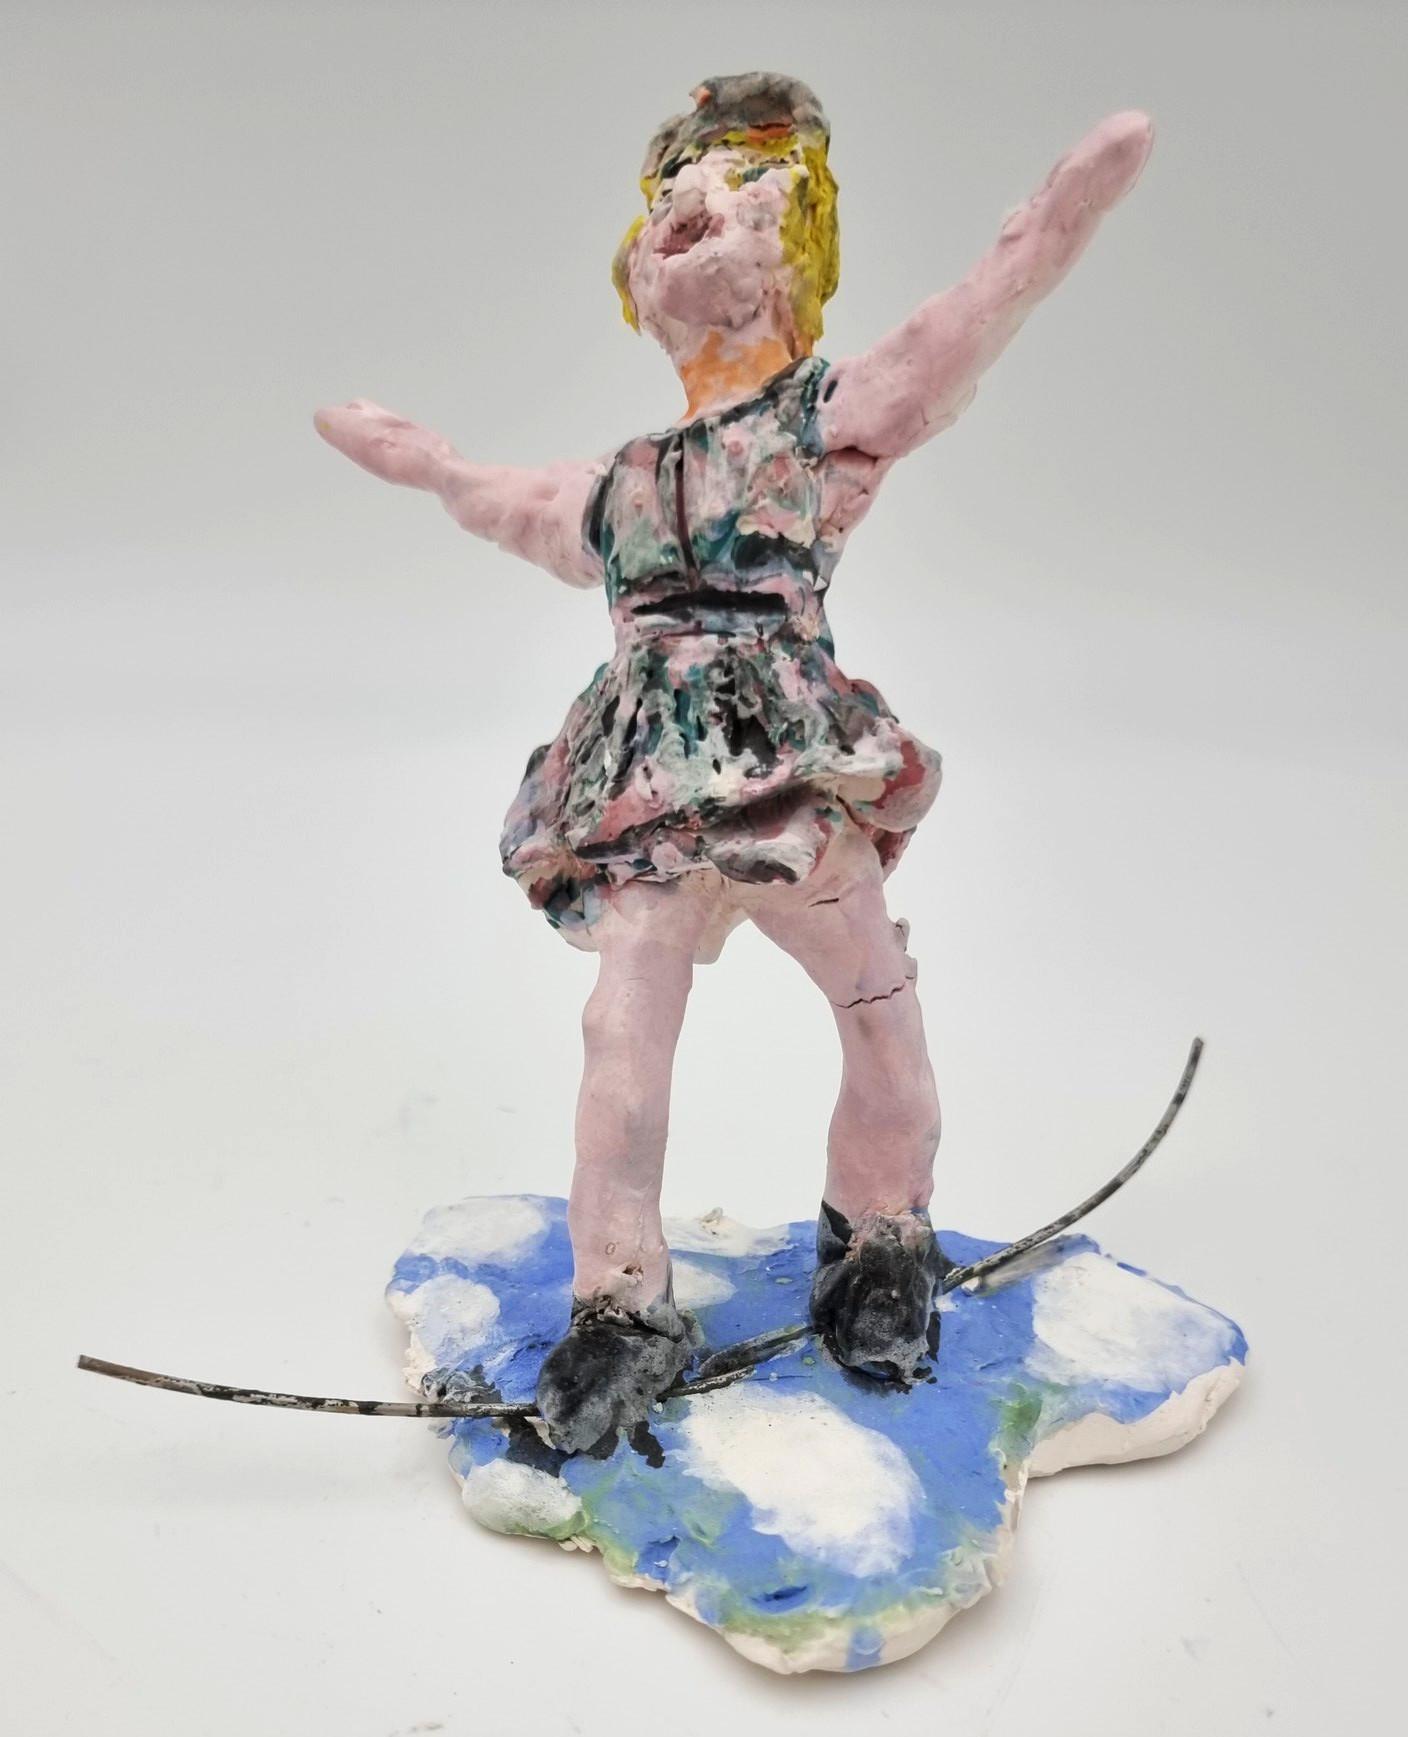 Female Tightrope Acrobat (Circus, Whimsical, Viola Frey, Delicate, Playful, Fun) - Sculpture by Ann Rothman